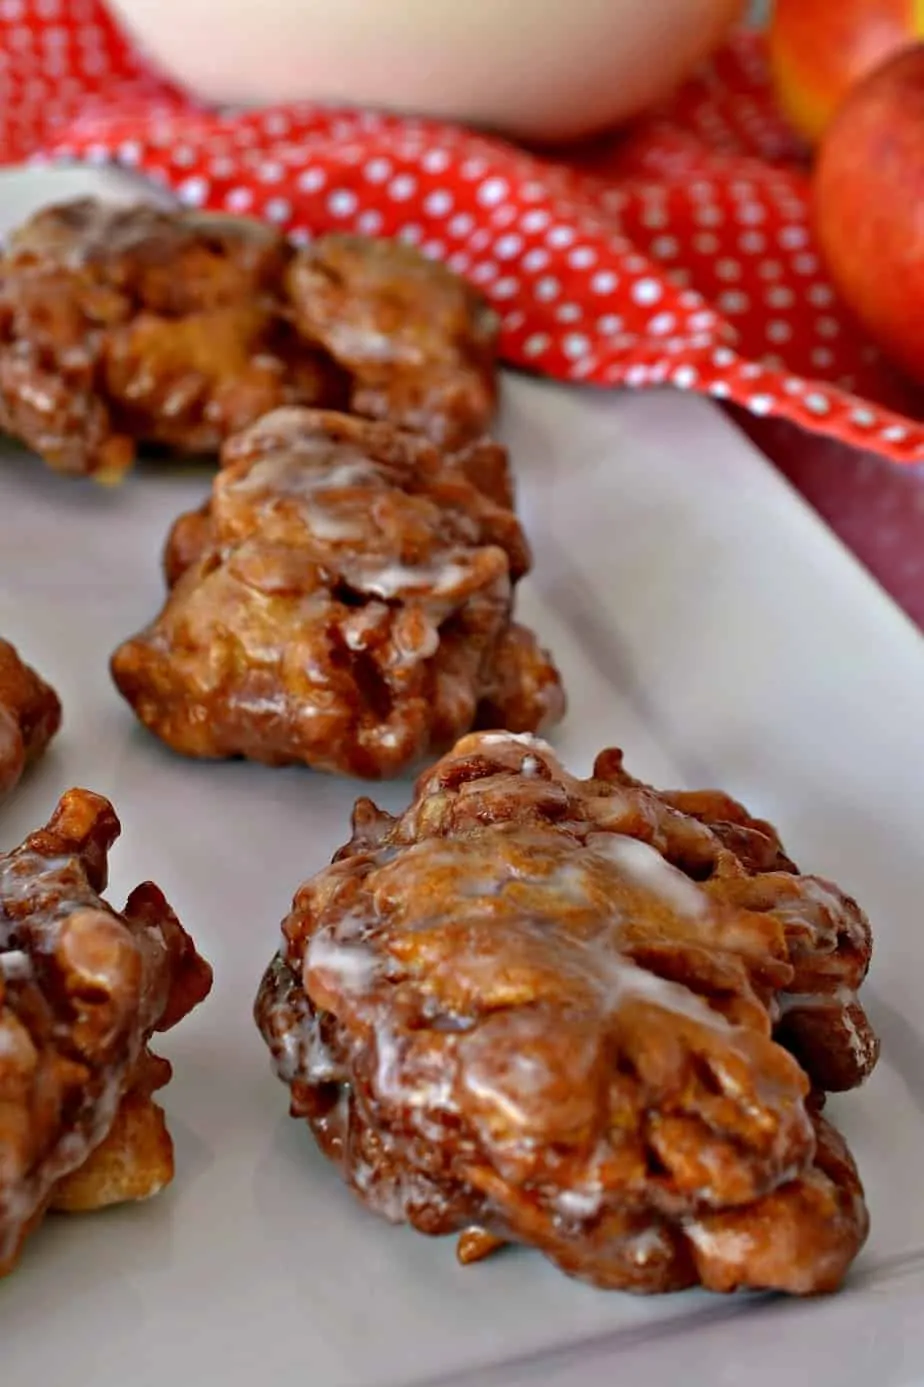 You can have these scrumptious warn apple fritters in your hands in less than thirty minutes.